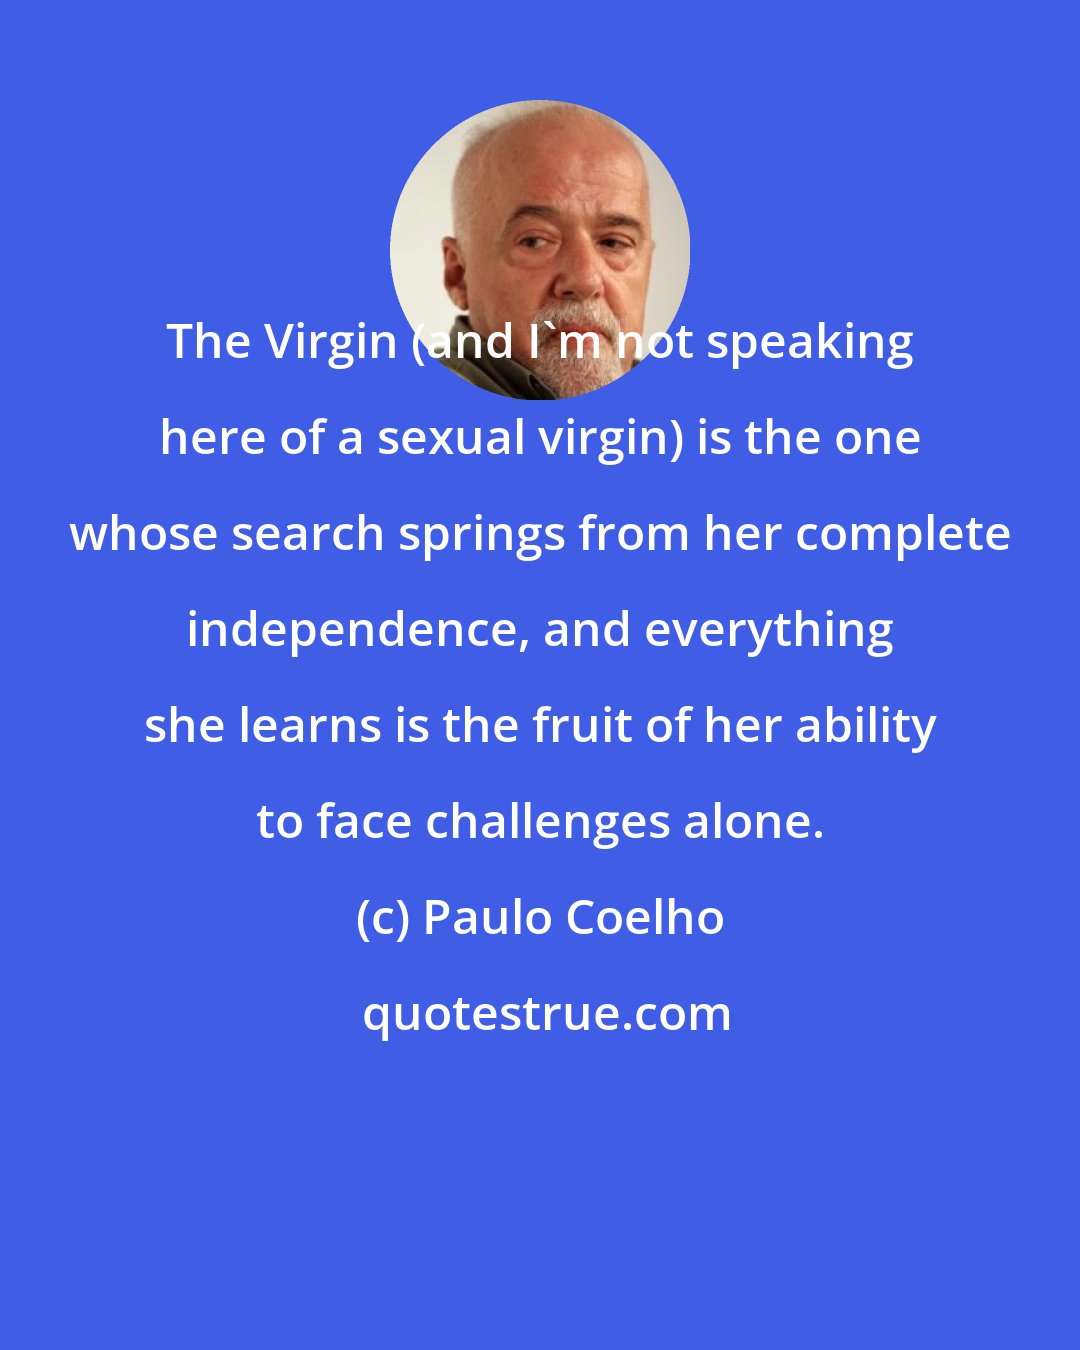 Paulo Coelho: The Virgin (and I'm not speaking here of a sexual virgin) is the one whose search springs from her complete independence, and everything she learns is the fruit of her ability to face challenges alone.